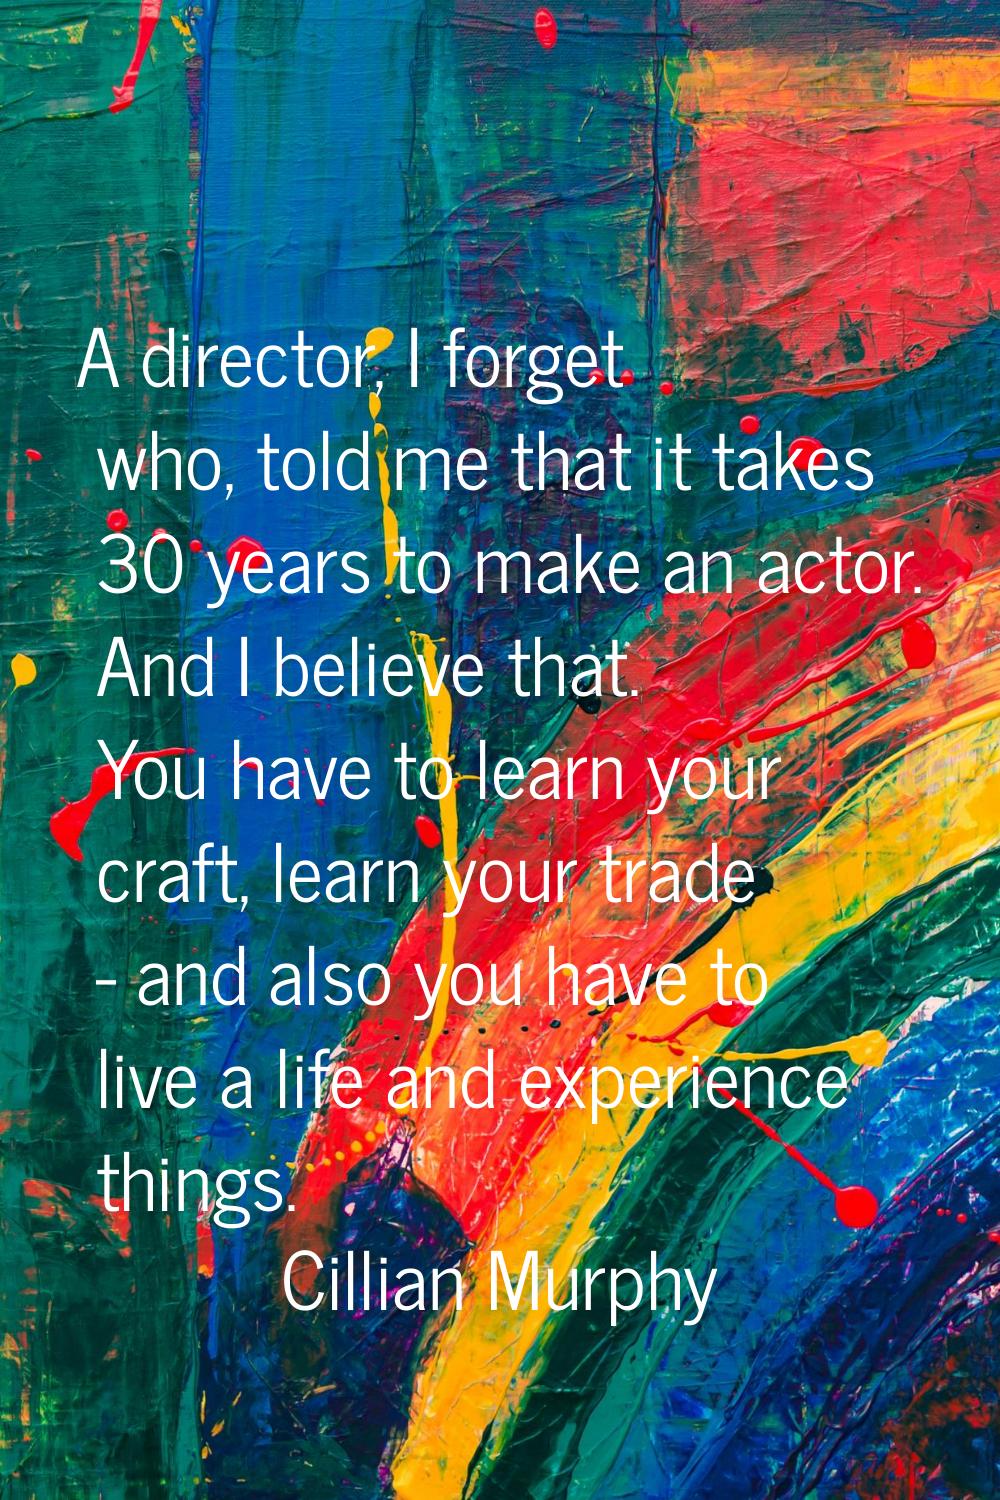 A director, I forget who, told me that it takes 30 years to make an actor. And I believe that. You 